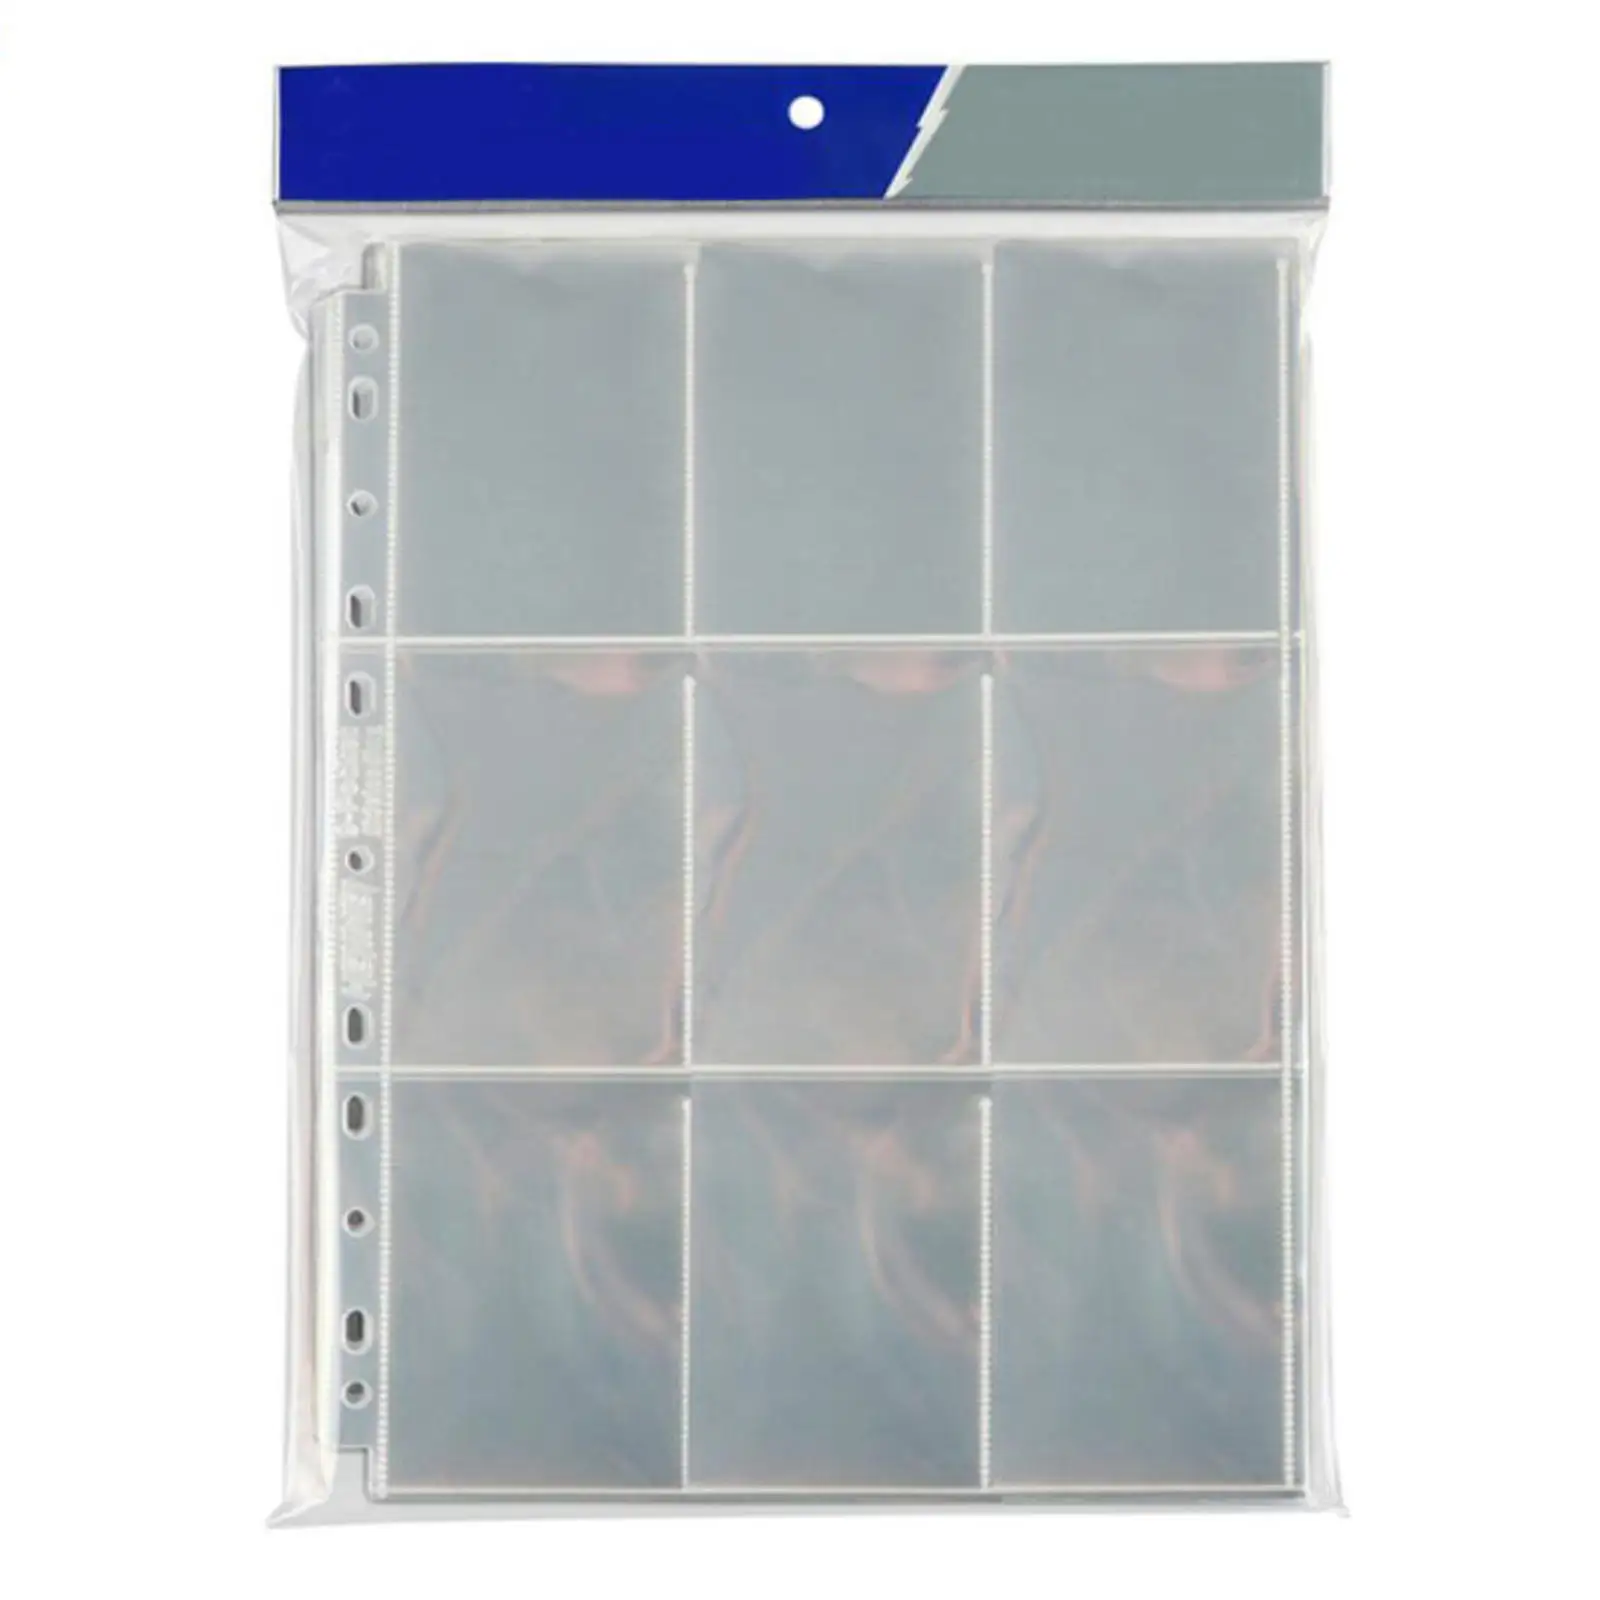 9-Pocket 20Pcs Clear Anti-Ultraviolet Plastic Waterproof Trading Card Page Sleeve Card Binder for Game Cards Album Pages Photo